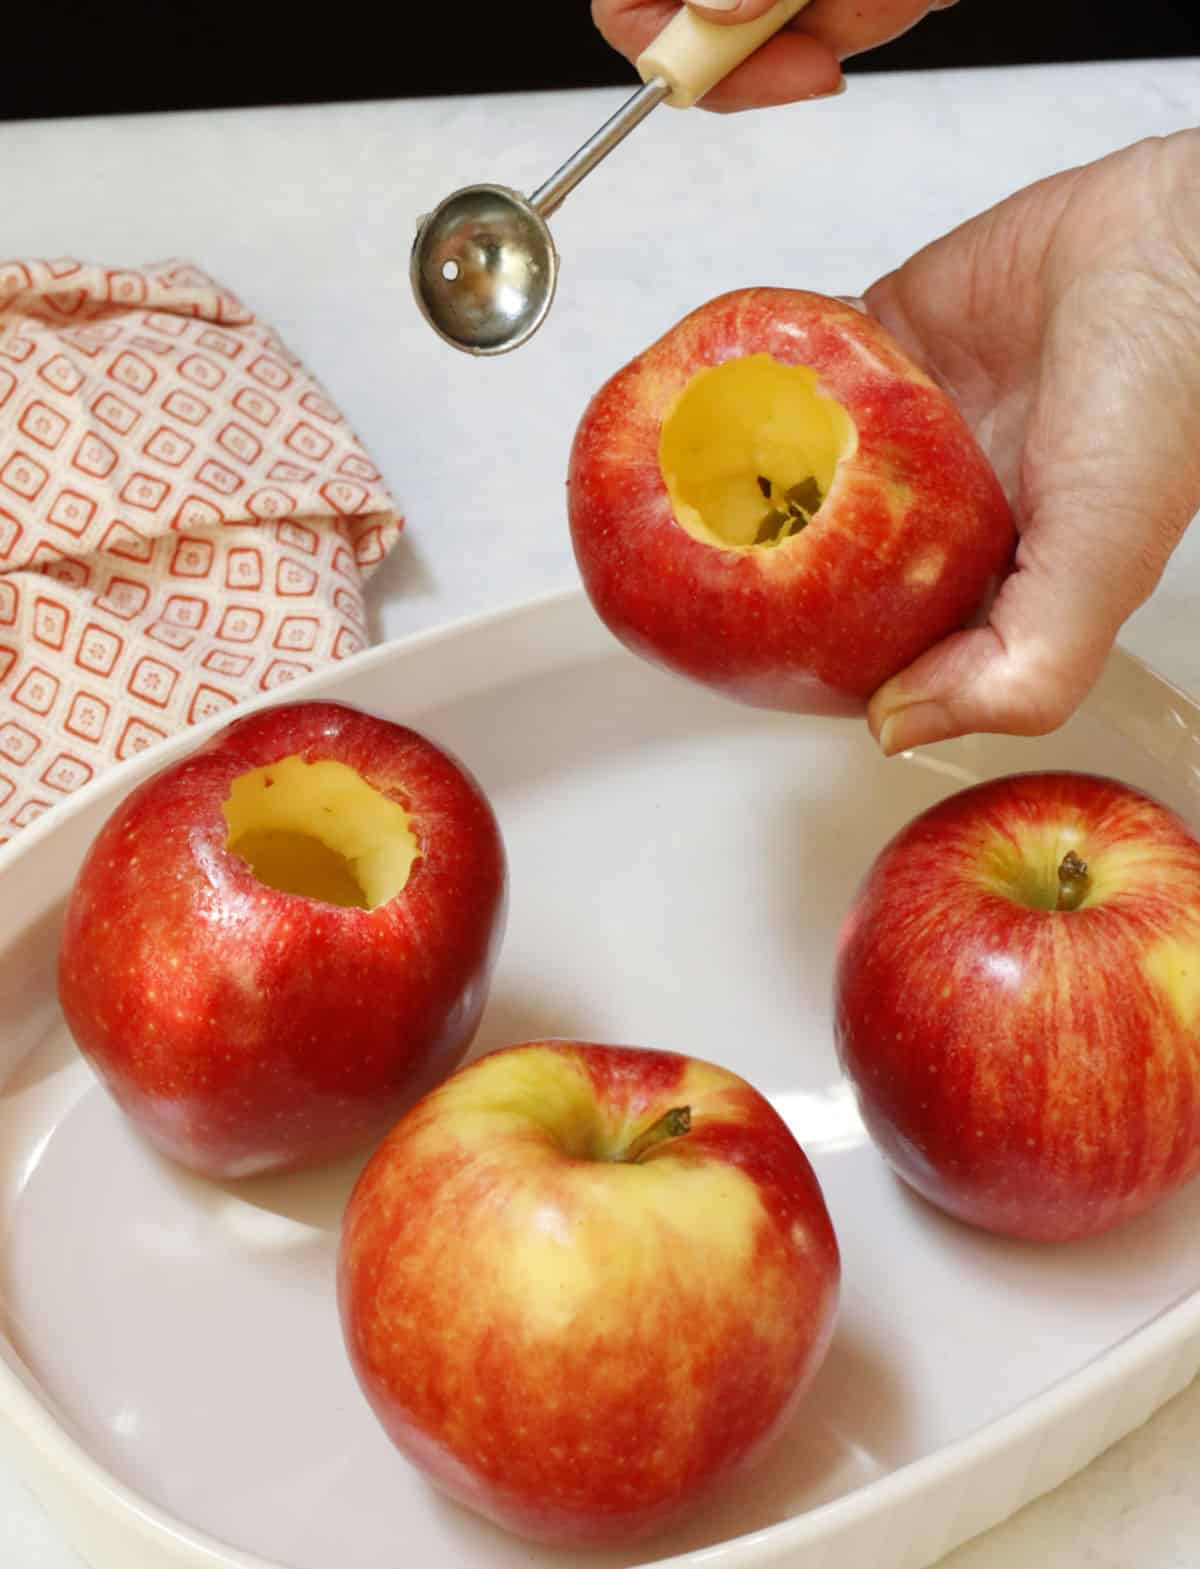 Cored apples in a white dish.